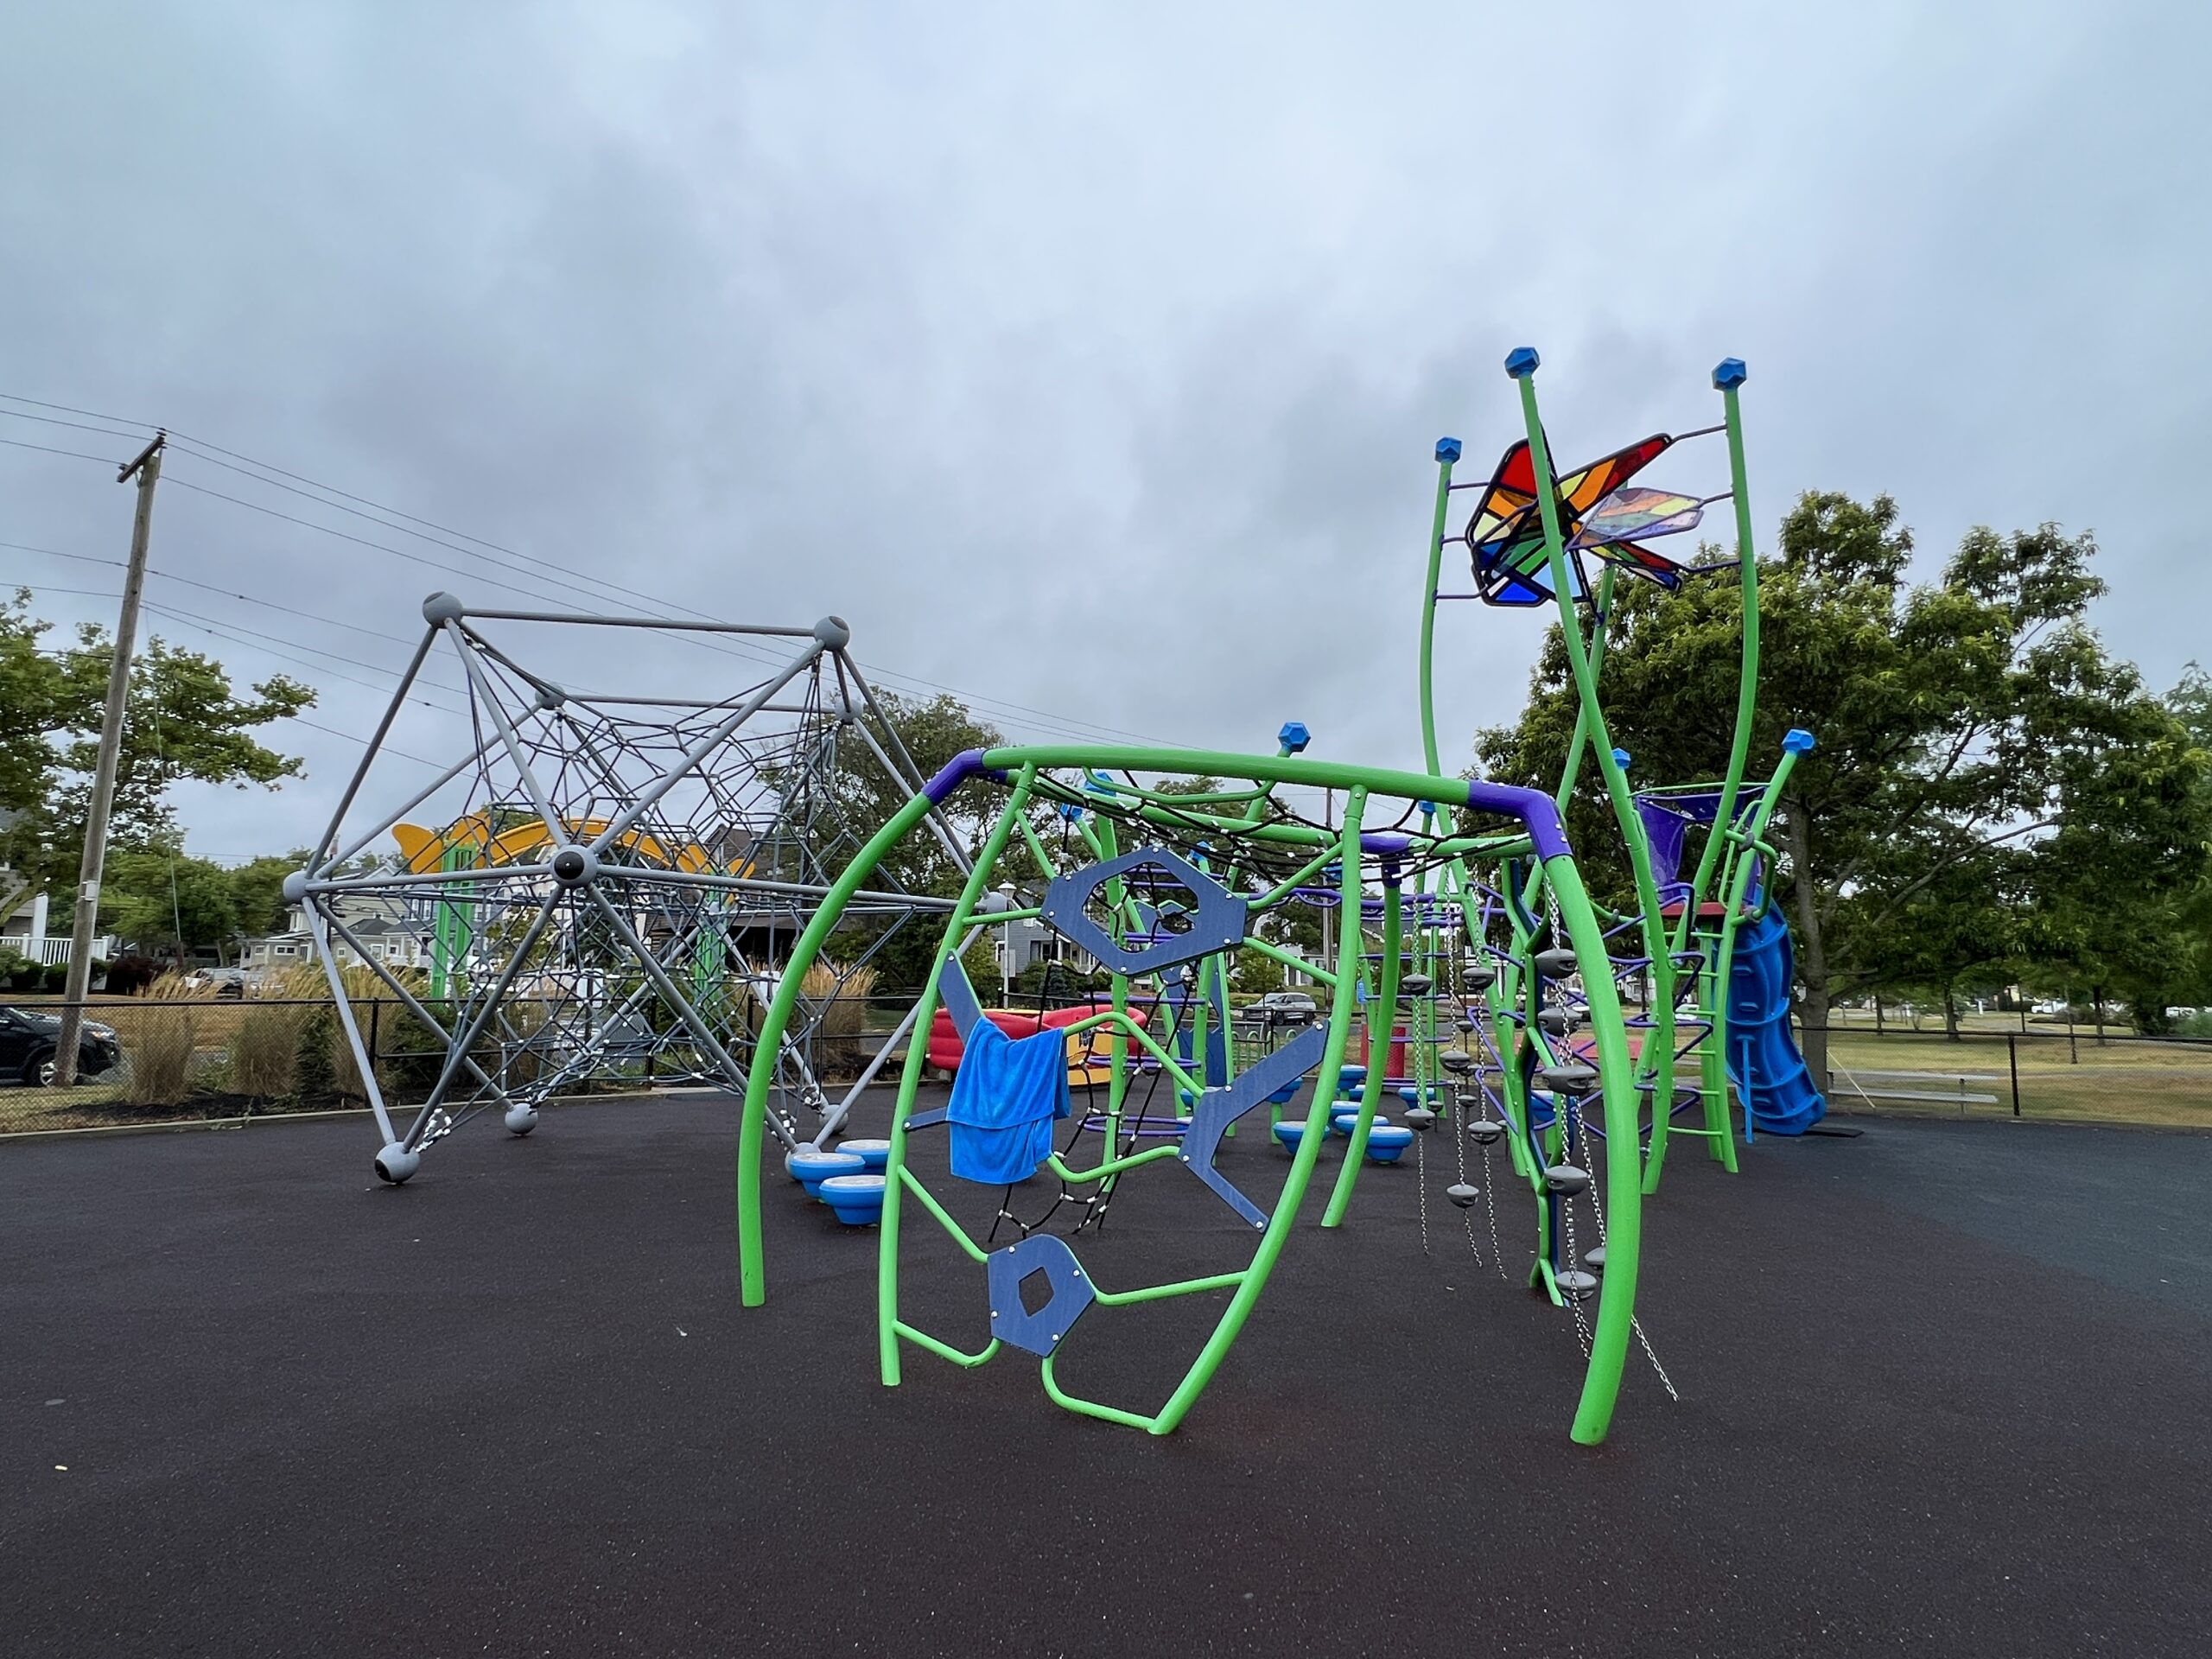 Features - Climbing spider web WITH green climbing structure WIDE image at Jane Magovern's Playground in Belmar NJ